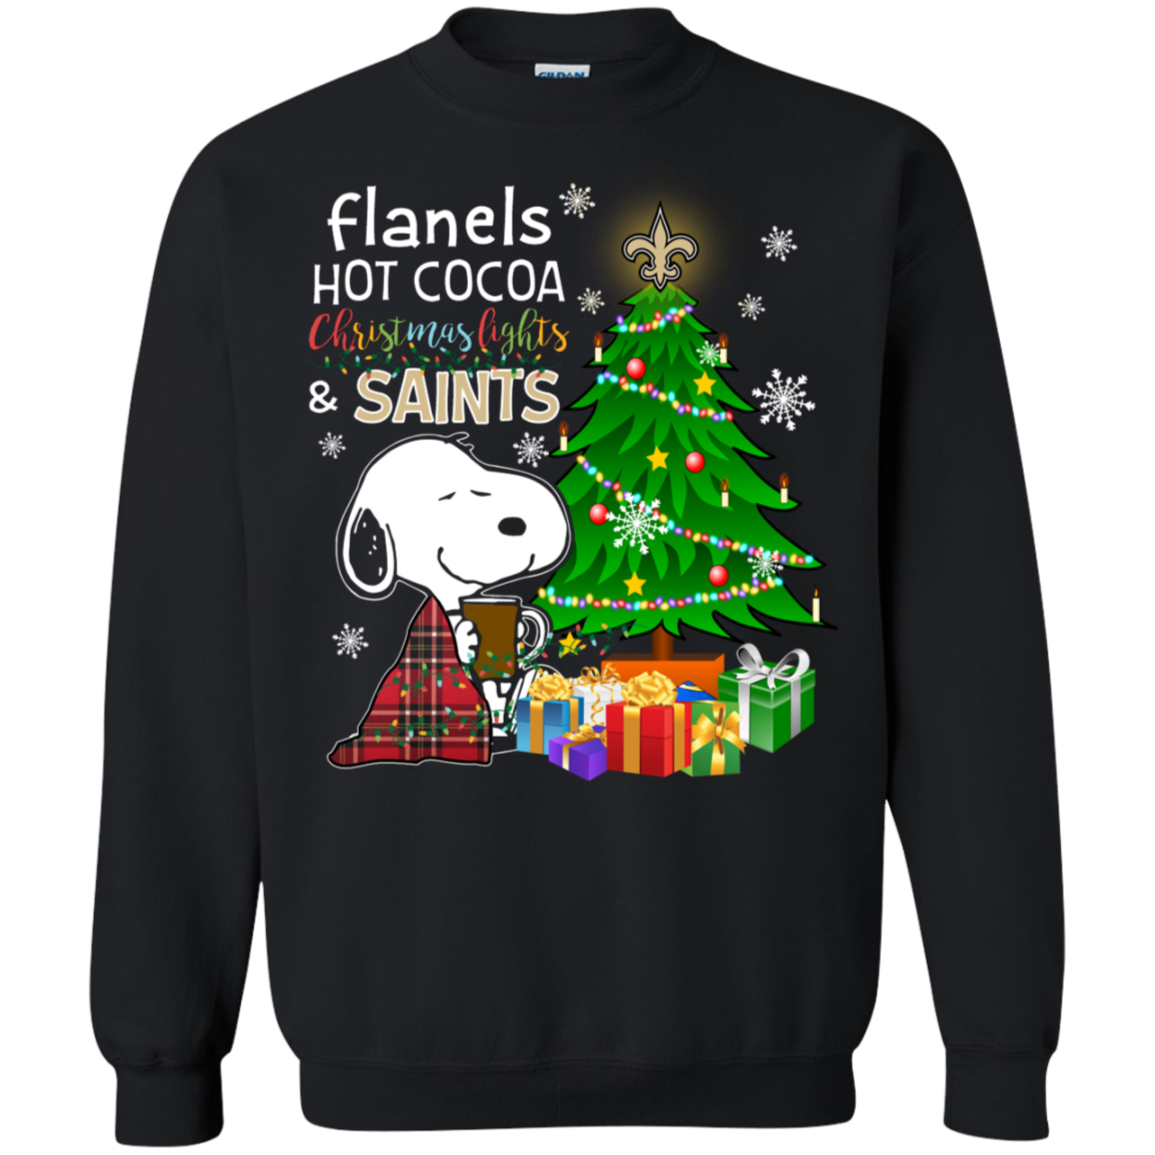 New Orleans Saints Snoopy Ugly Christmas Sweater Flanels Hot Cocoa ...